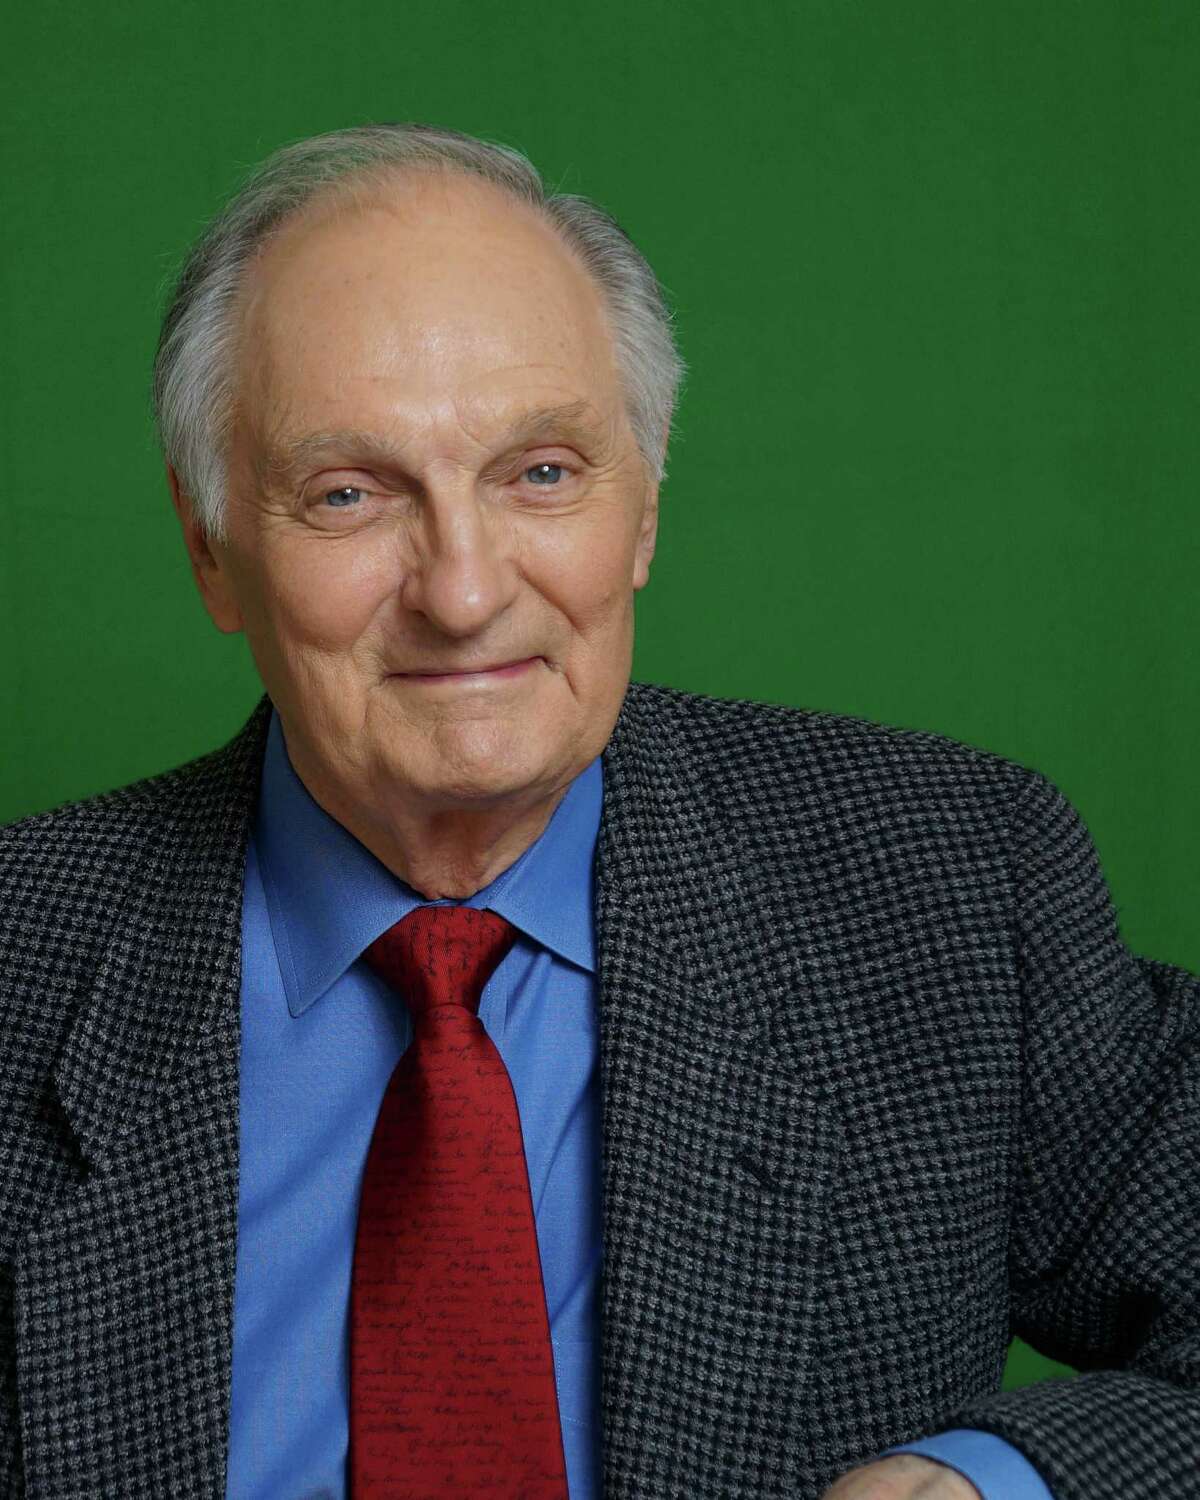 Alan Alda, a world renown actor and writer, is set to headline the Westport Library?’s BOOKED for the Evening to promote his new book--If I Understood You, Would I Have This Look on My Face?: My Adventures in the Art and Science of Relating and Communicating.